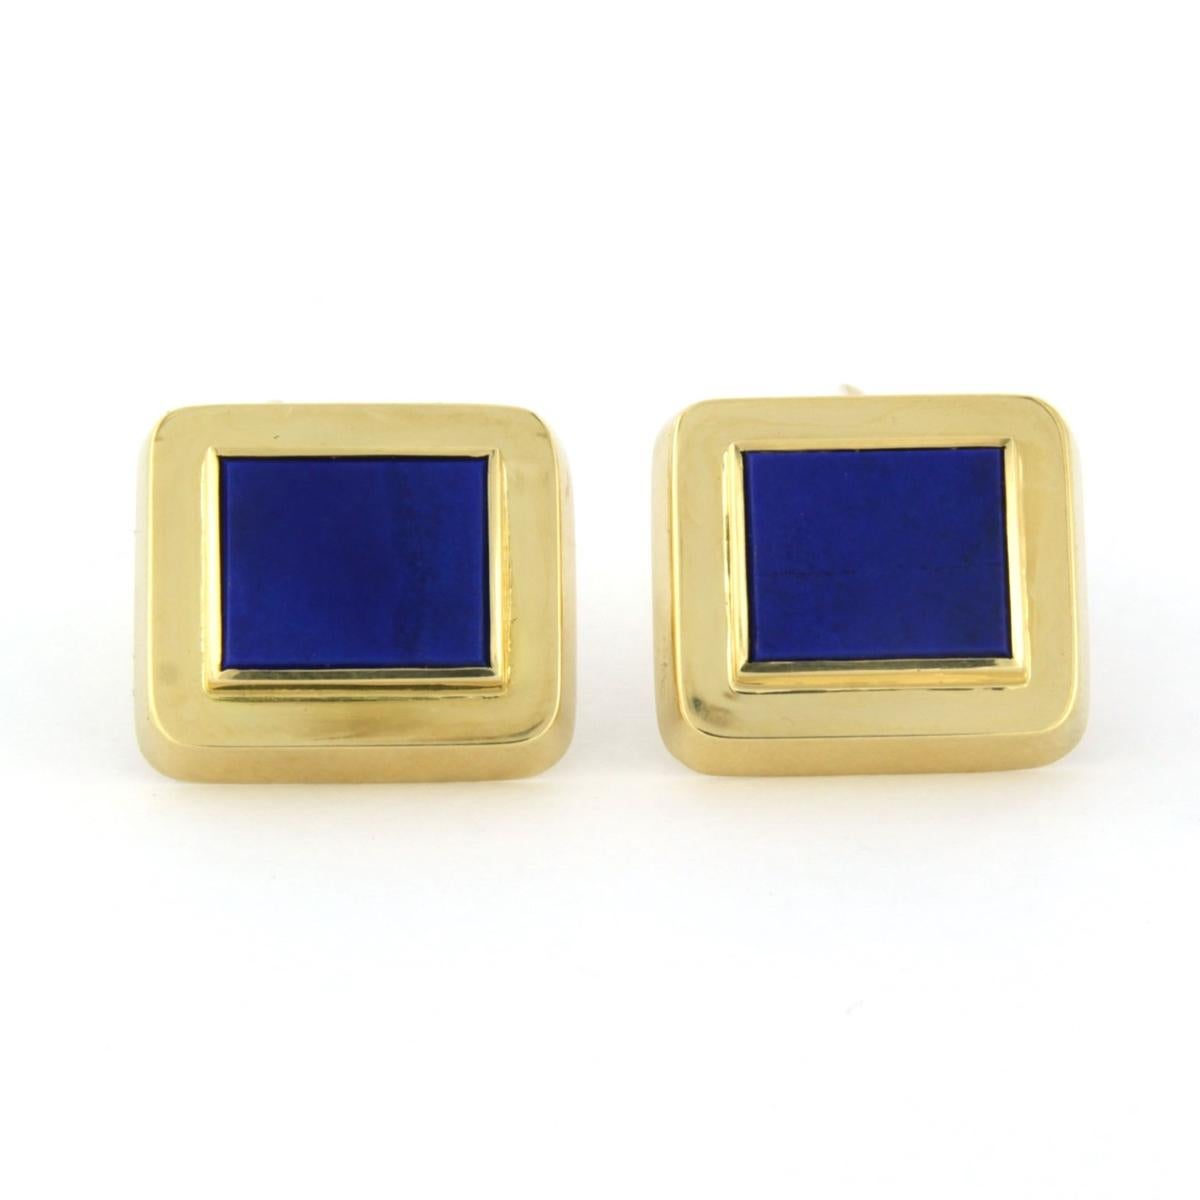 18k yellow gold cufflinks set with lapis lazuli

detailed description

the size of the cufflink is 1.9 cm by 1.8 cm wide

weight 20.2 grams

set with

- 2 x 1.2 cm x 1.0 cm square flat cut lapis lazuli

color blue
clarity na
Gemstones have often